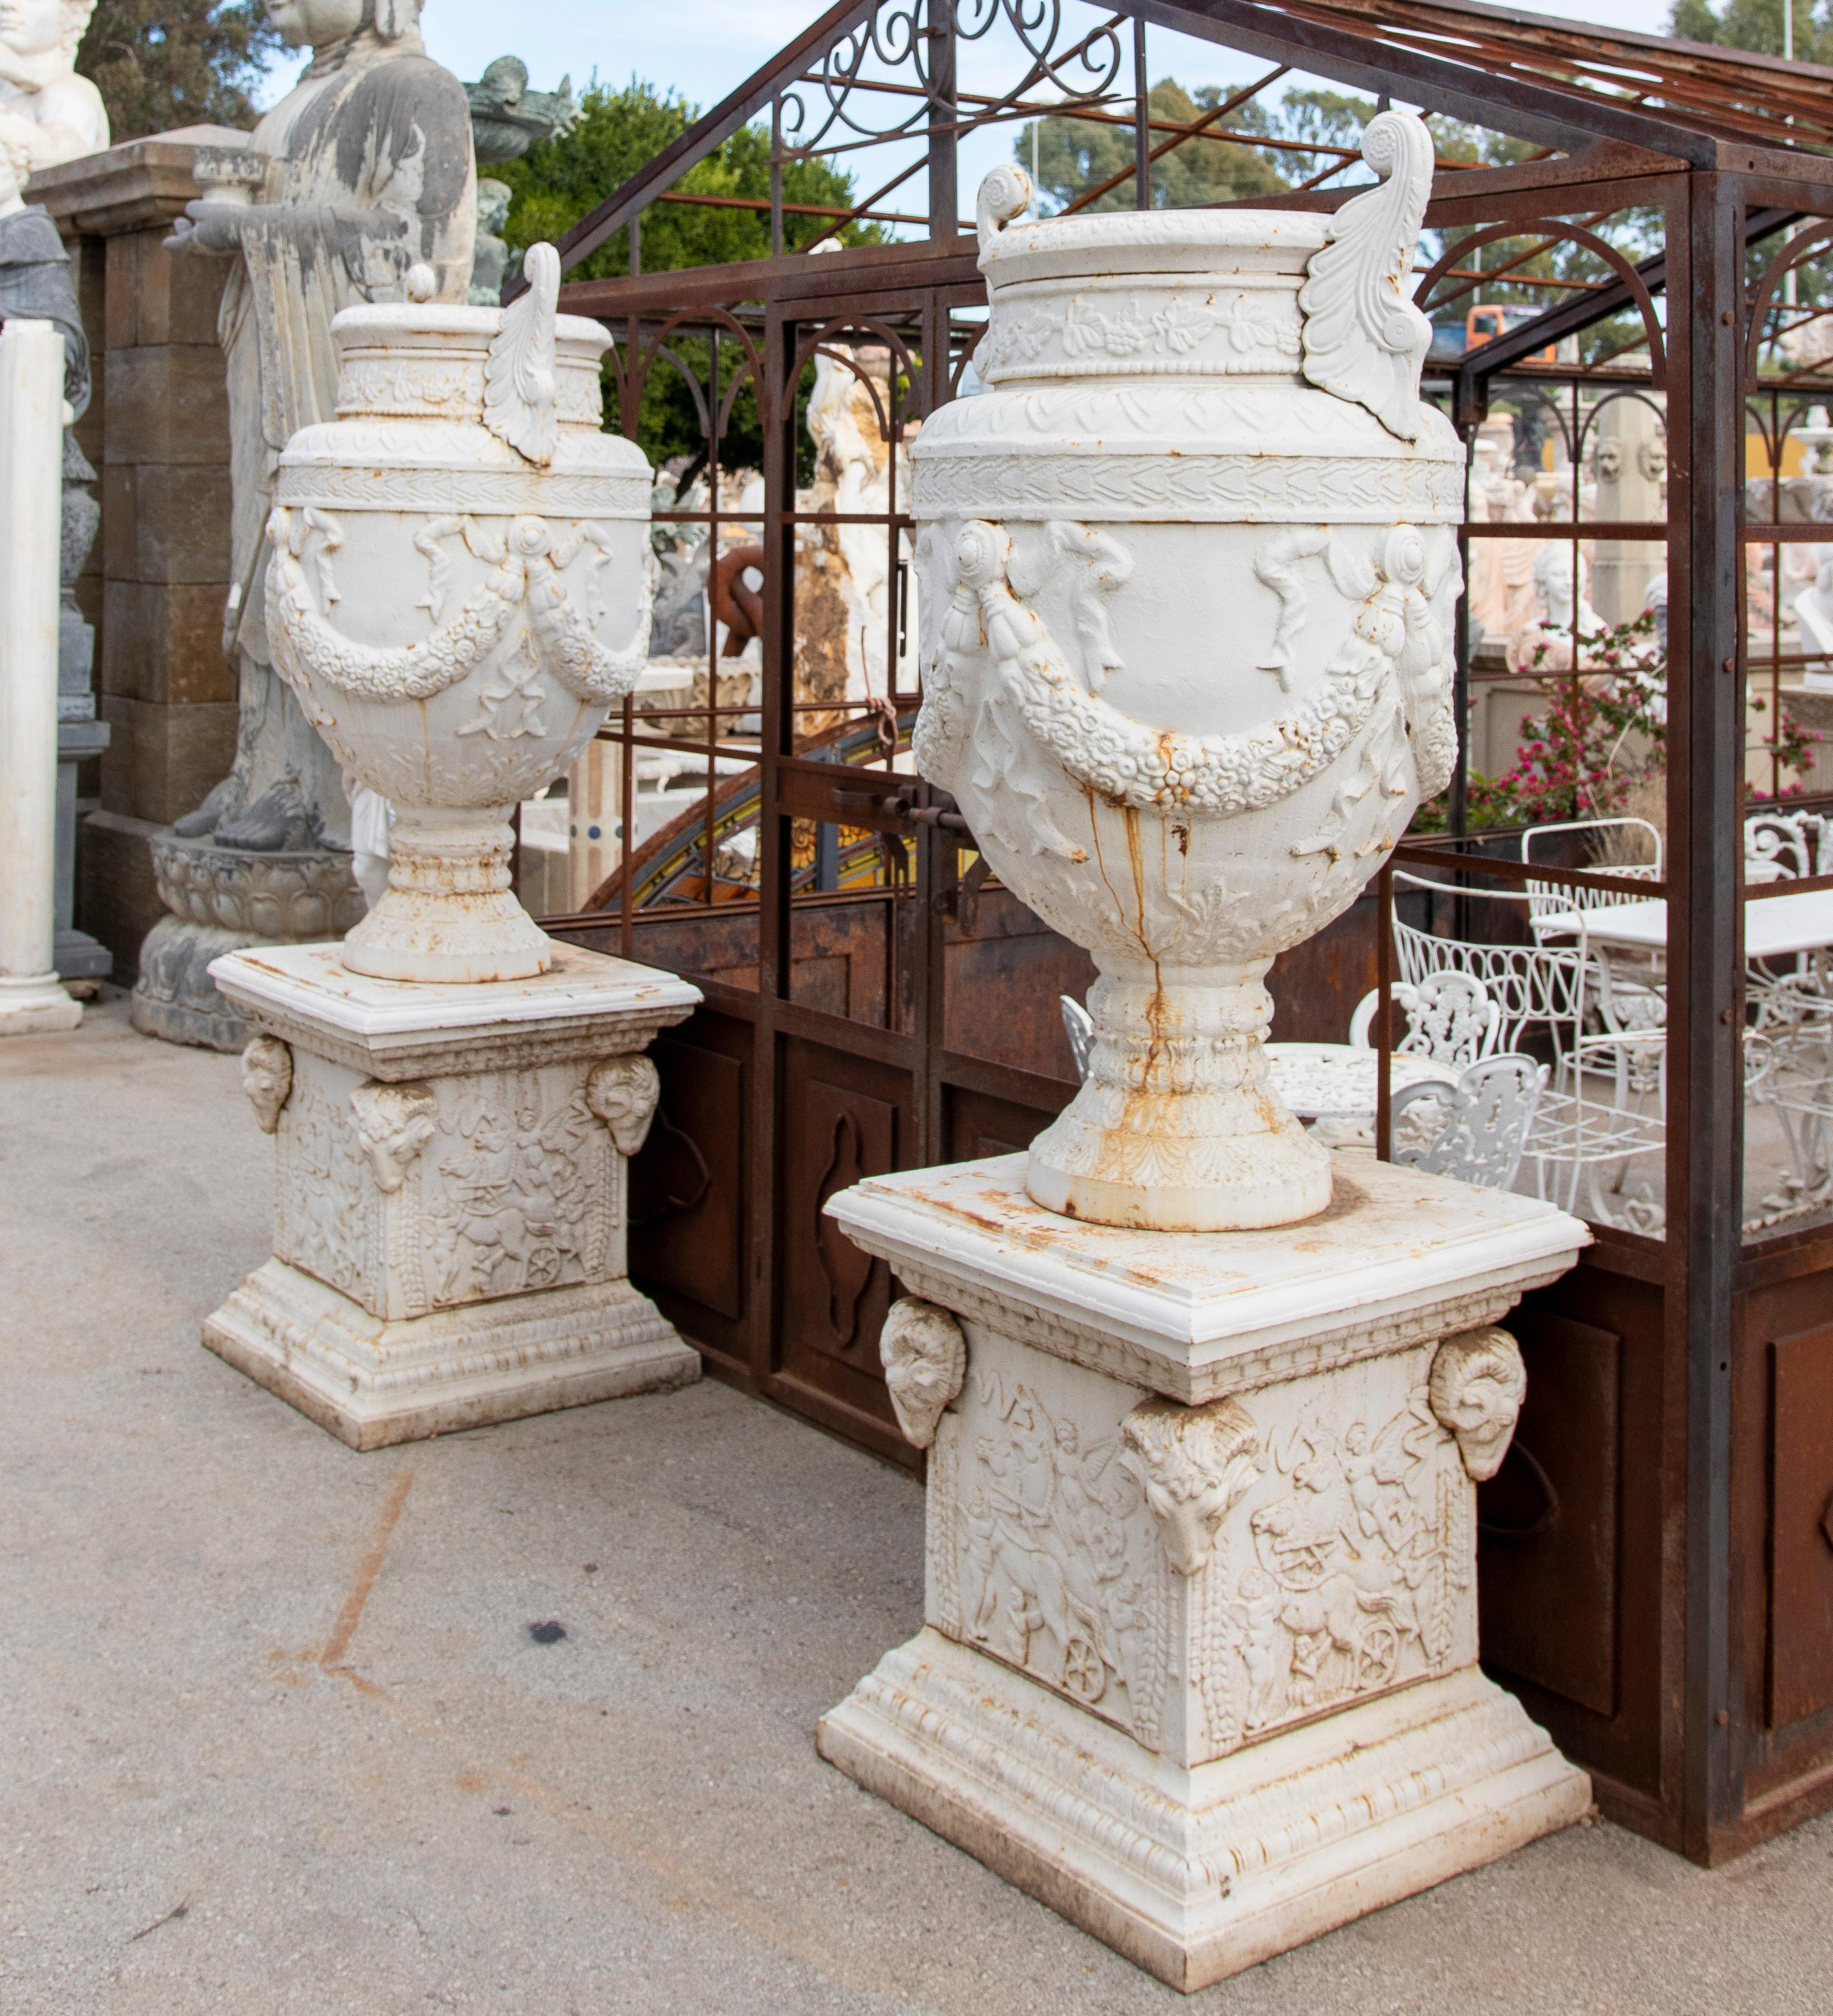 Pair of classical 1990s French monumental cast iron garden planter urns with plinth bases, painted white.